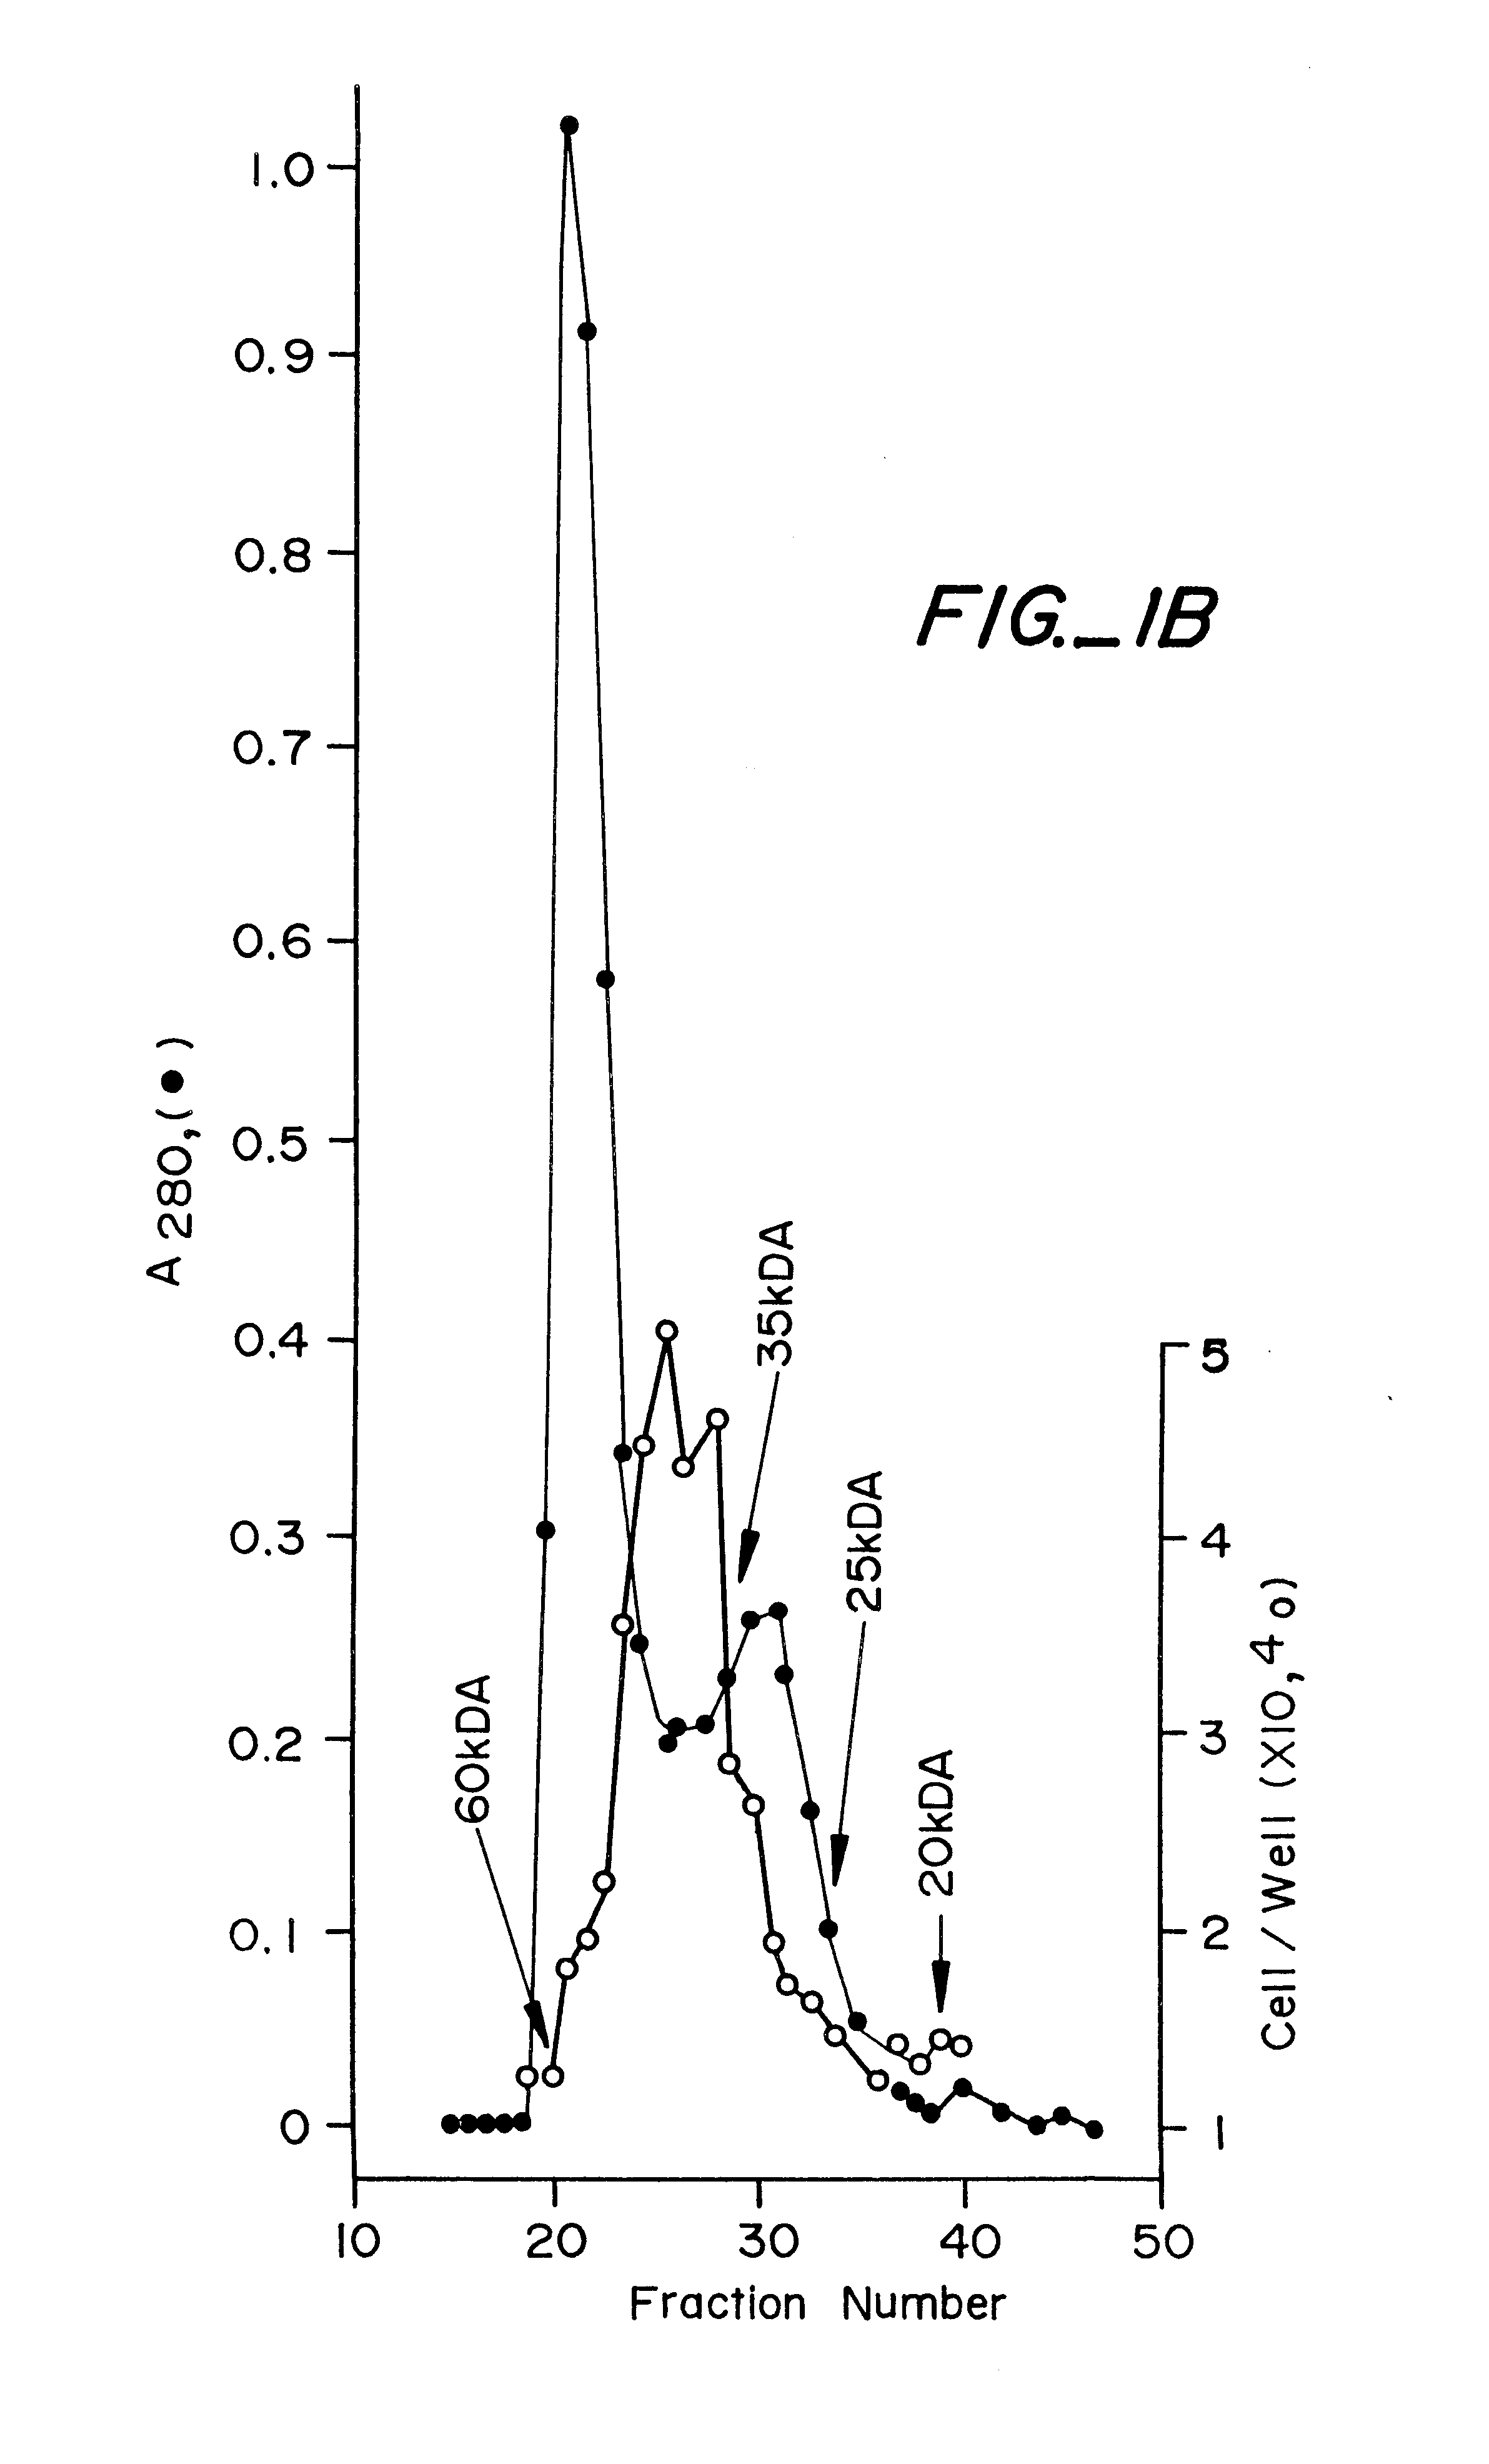 Endothelial cell growth factor methods of isolation and expression